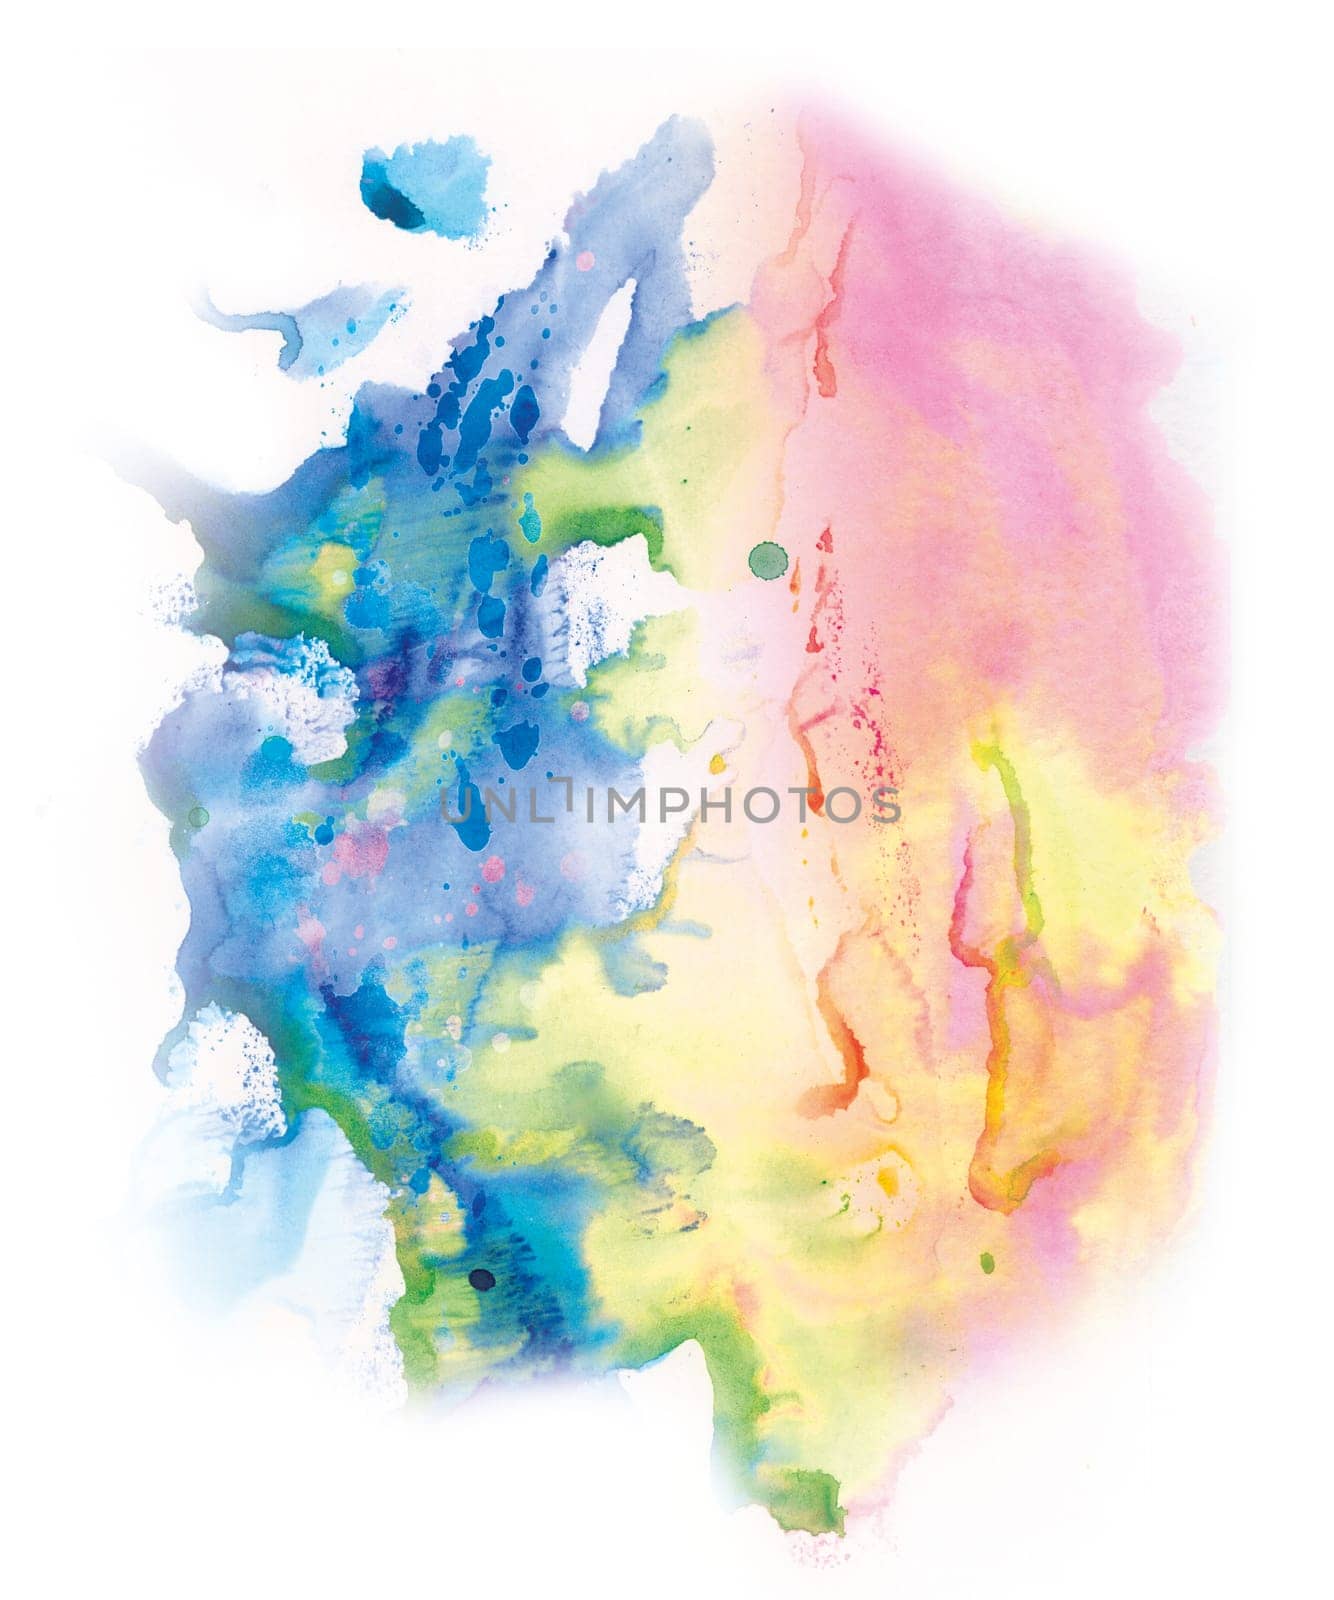 Drops and blots together with watercolor and gouache monotypes isolated on a white background for design and creating art effects